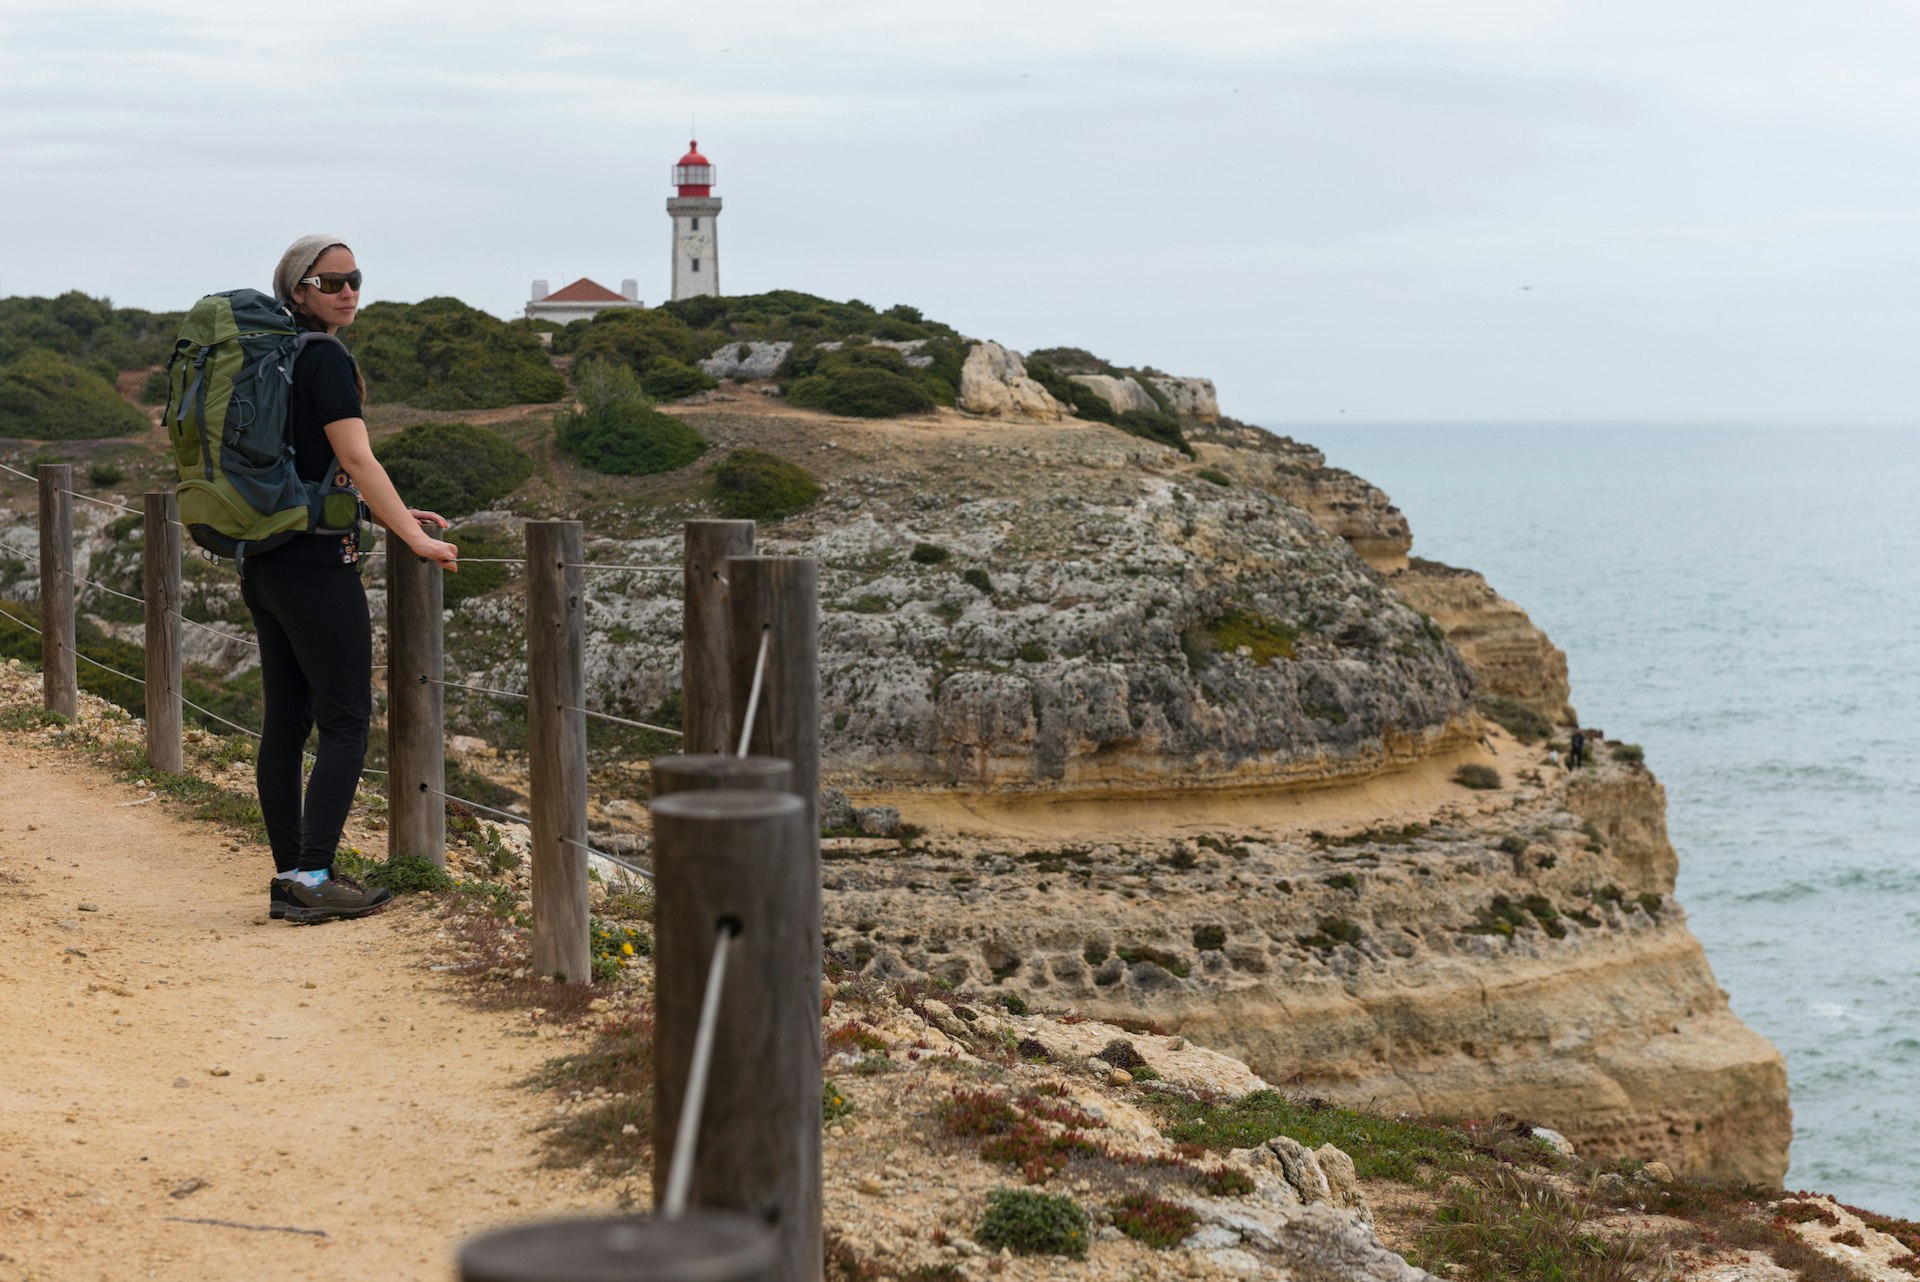 A female hiker on the Seven Hanging Valleys Trail (Percurso dos Sete Vales Suspensos) admires a view of a lighthouse and striated rock formations, the Algarve, Portugal